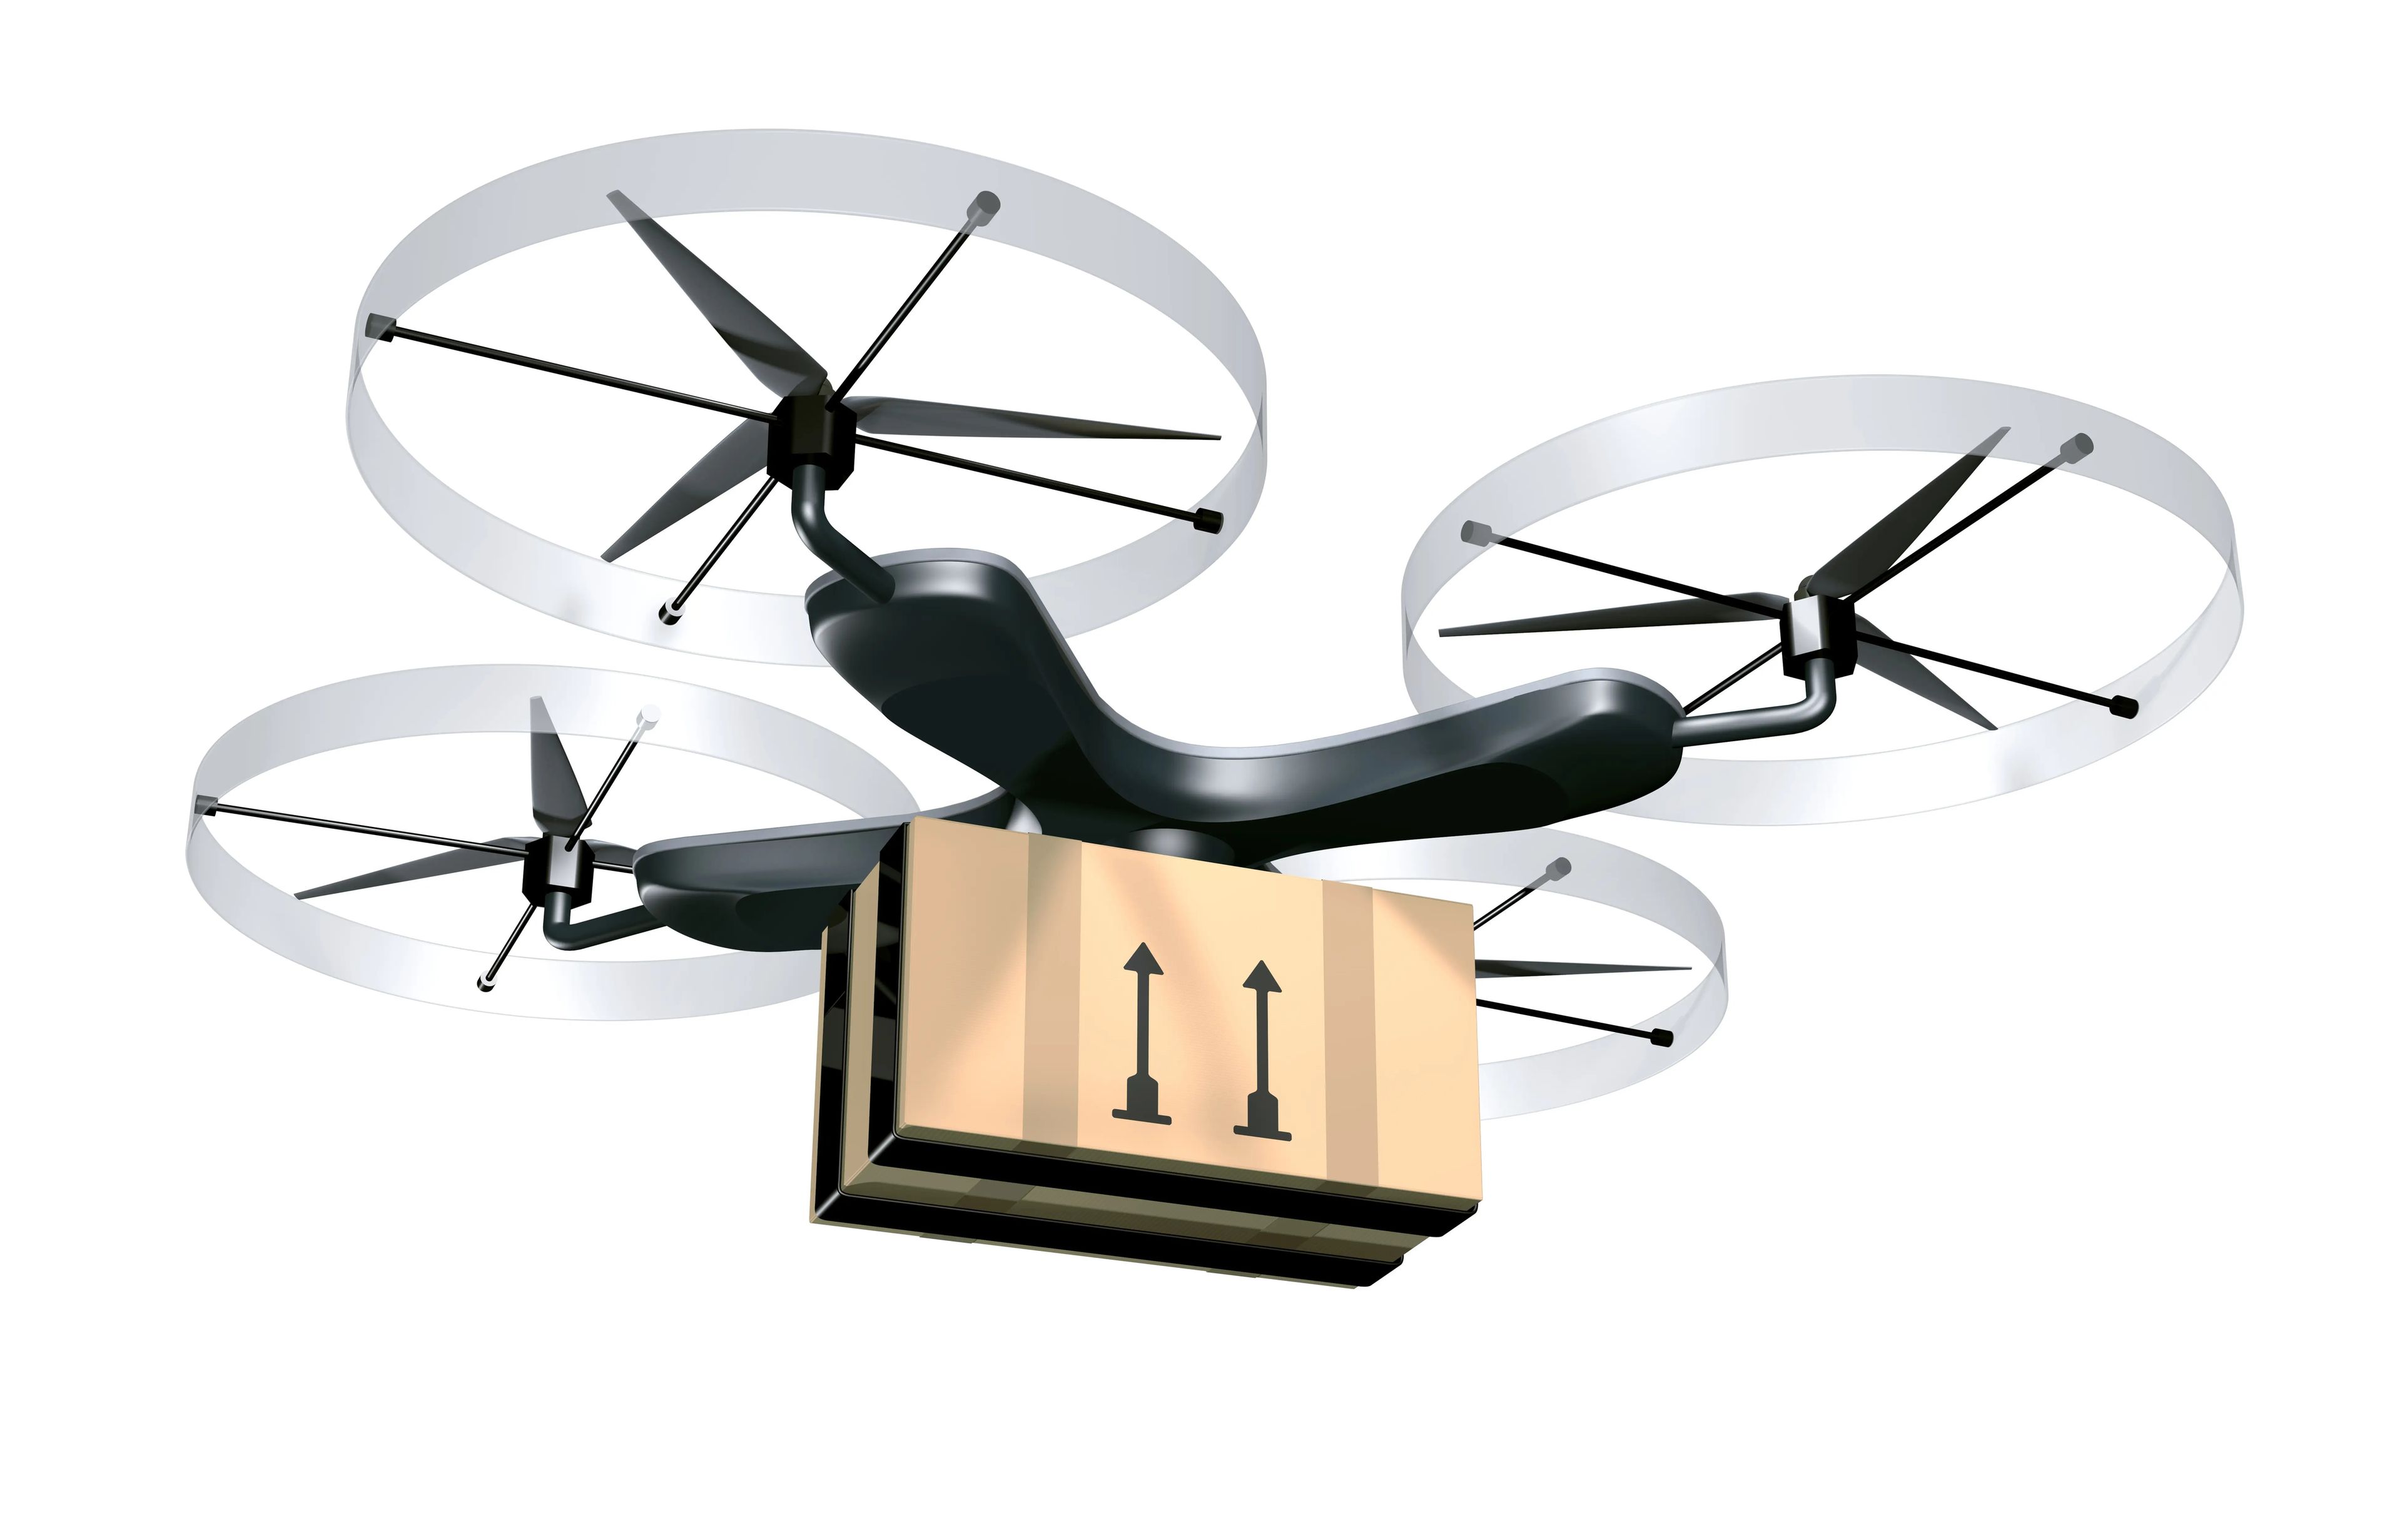 An unmanned drone for parcel delivery purposes.